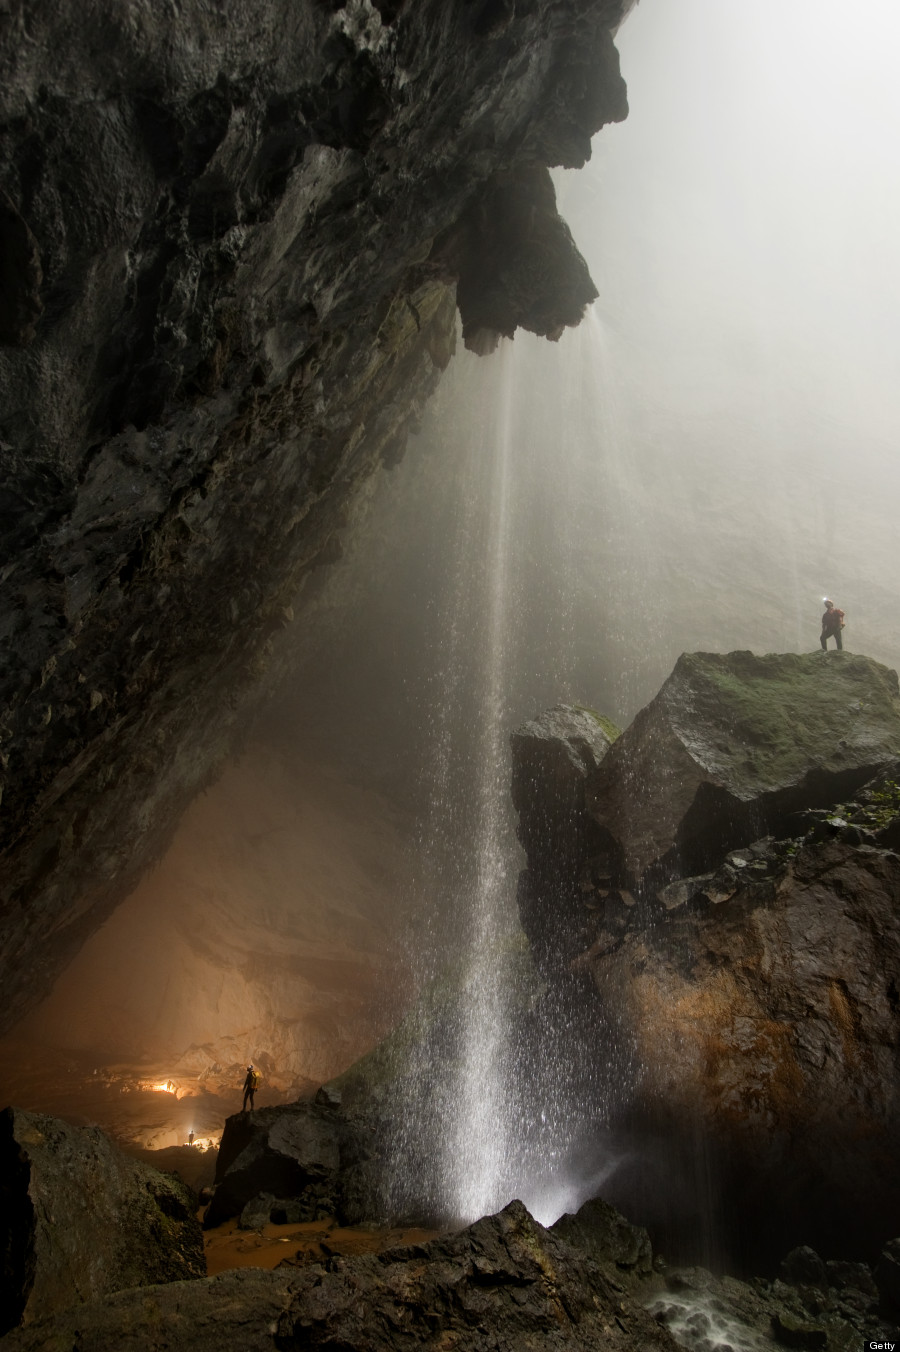 VIETNAM - MAY 01: A cascading waterfall in Hang Son Doong. (Photo by Carsten Peter/National Geographic/Getty Images)